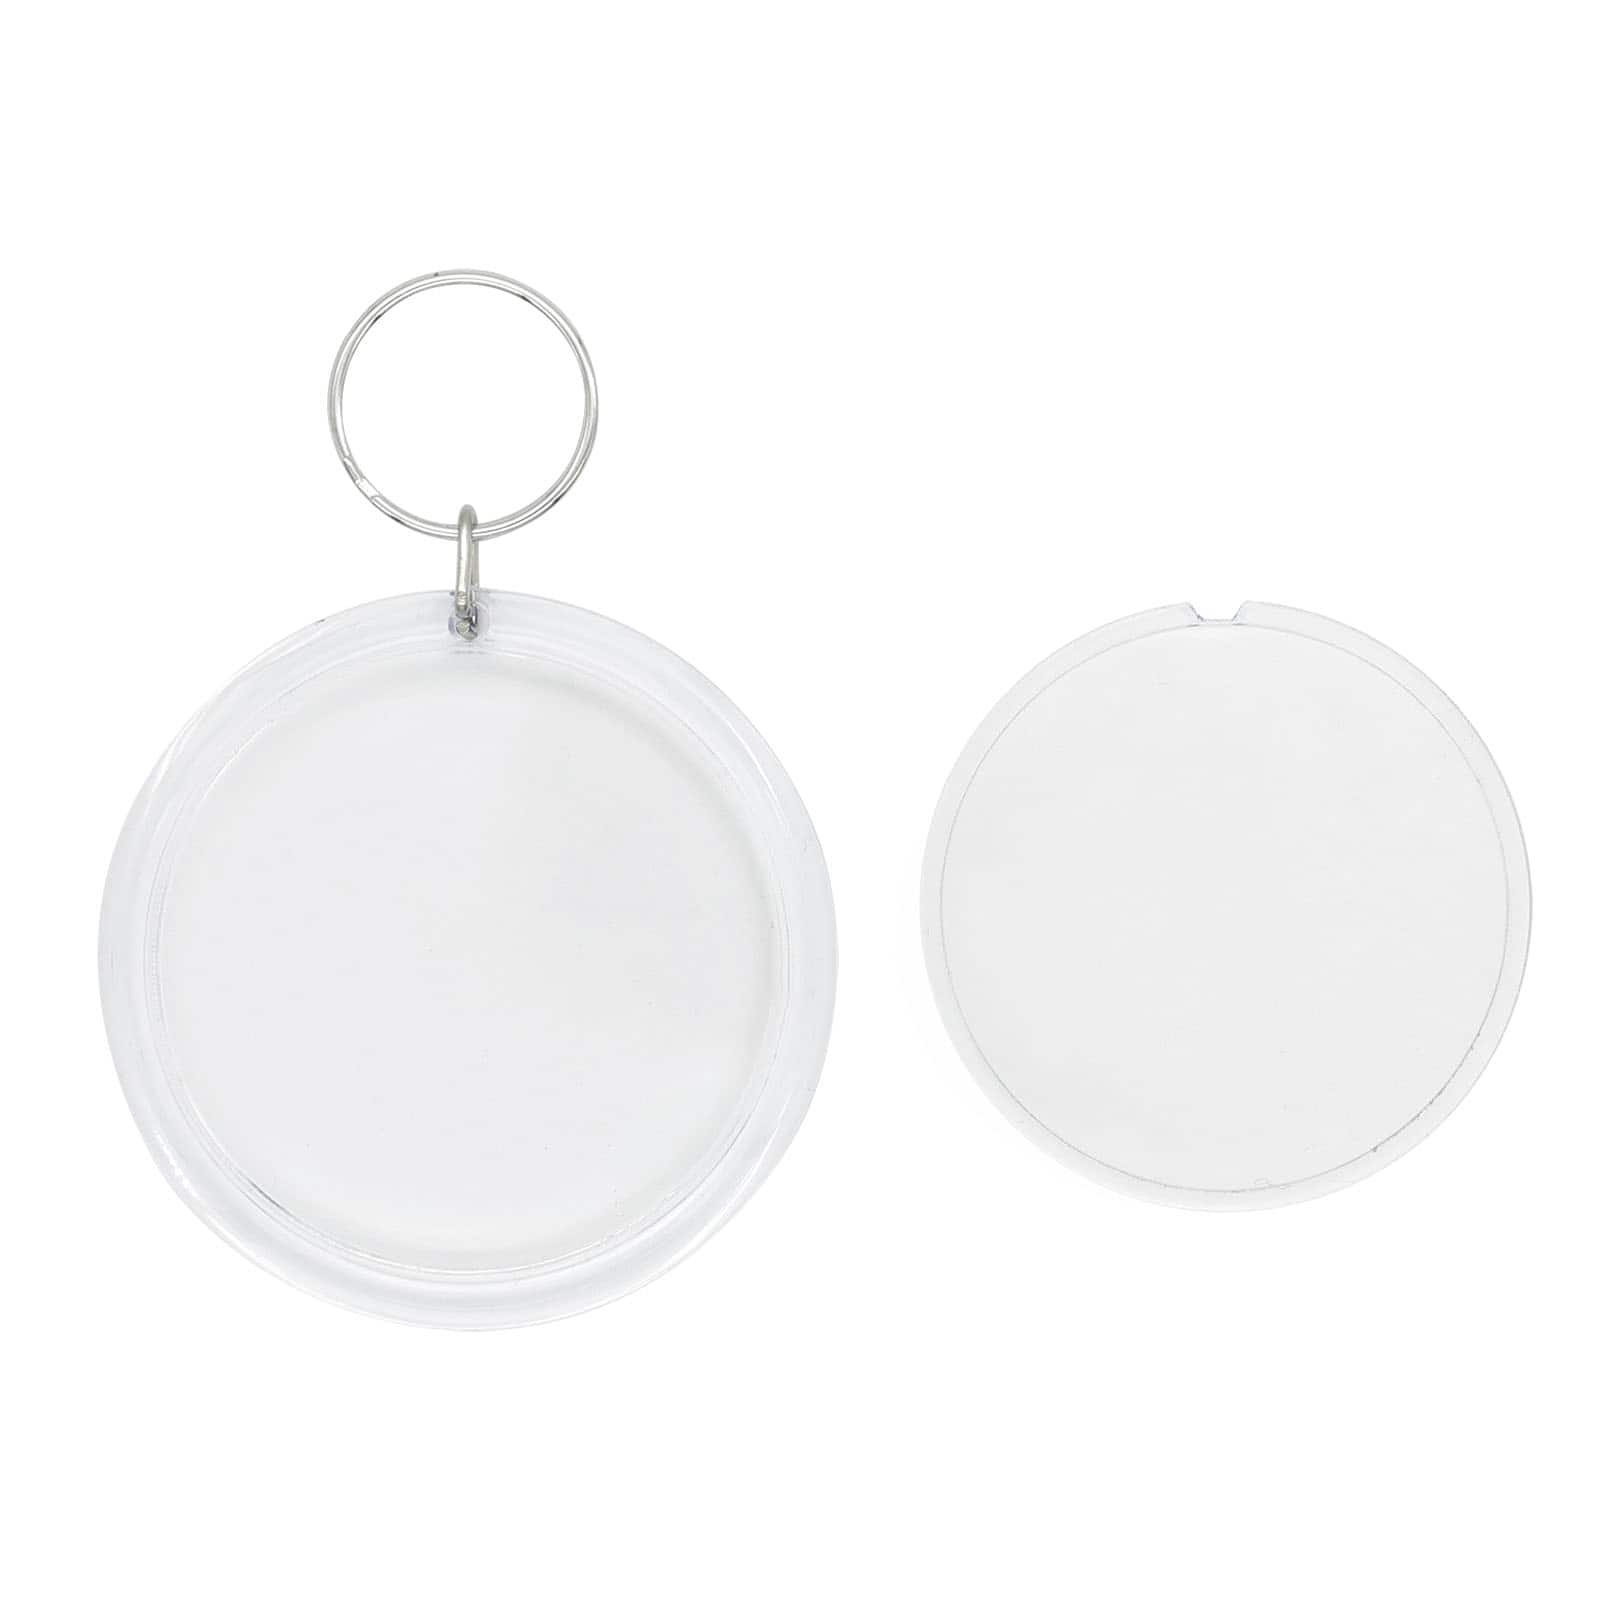 Round Clear Plastic Keychains, 16ct. by Creatology™